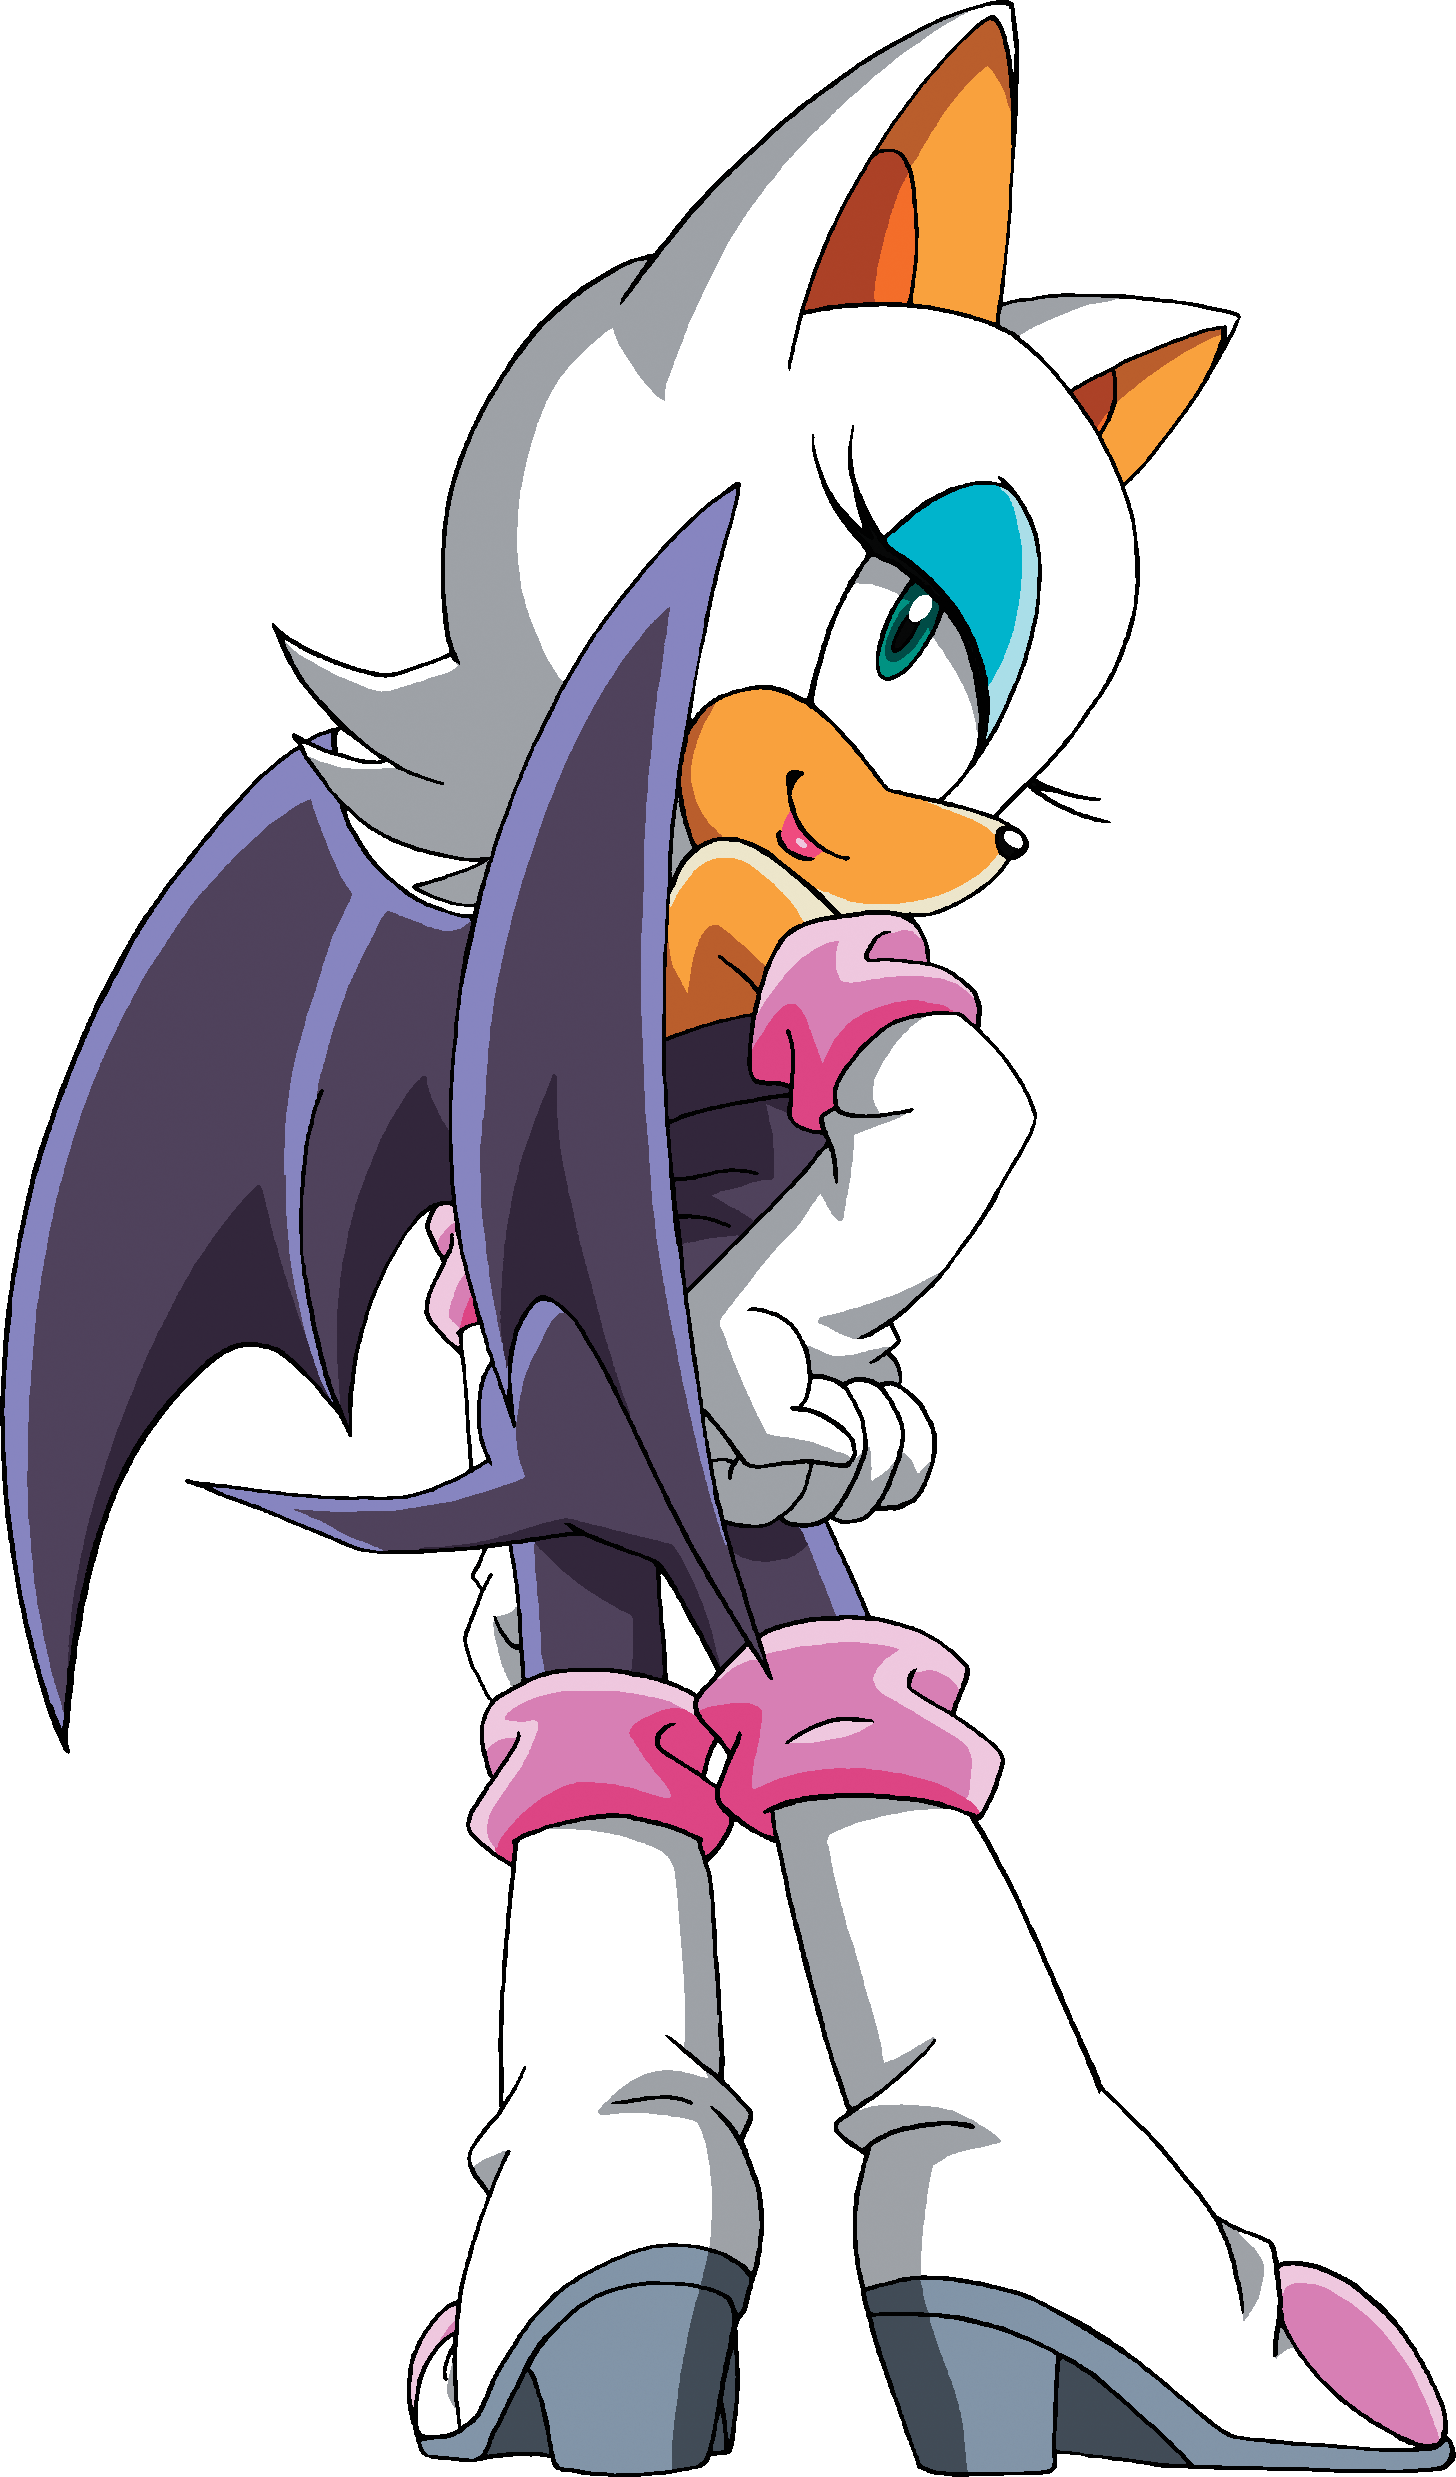 http://media.sonicscanf.org/gallery/rouge-the-bat/Sonic%20X%20%E2%80%93%20Over%20Shoulder.png